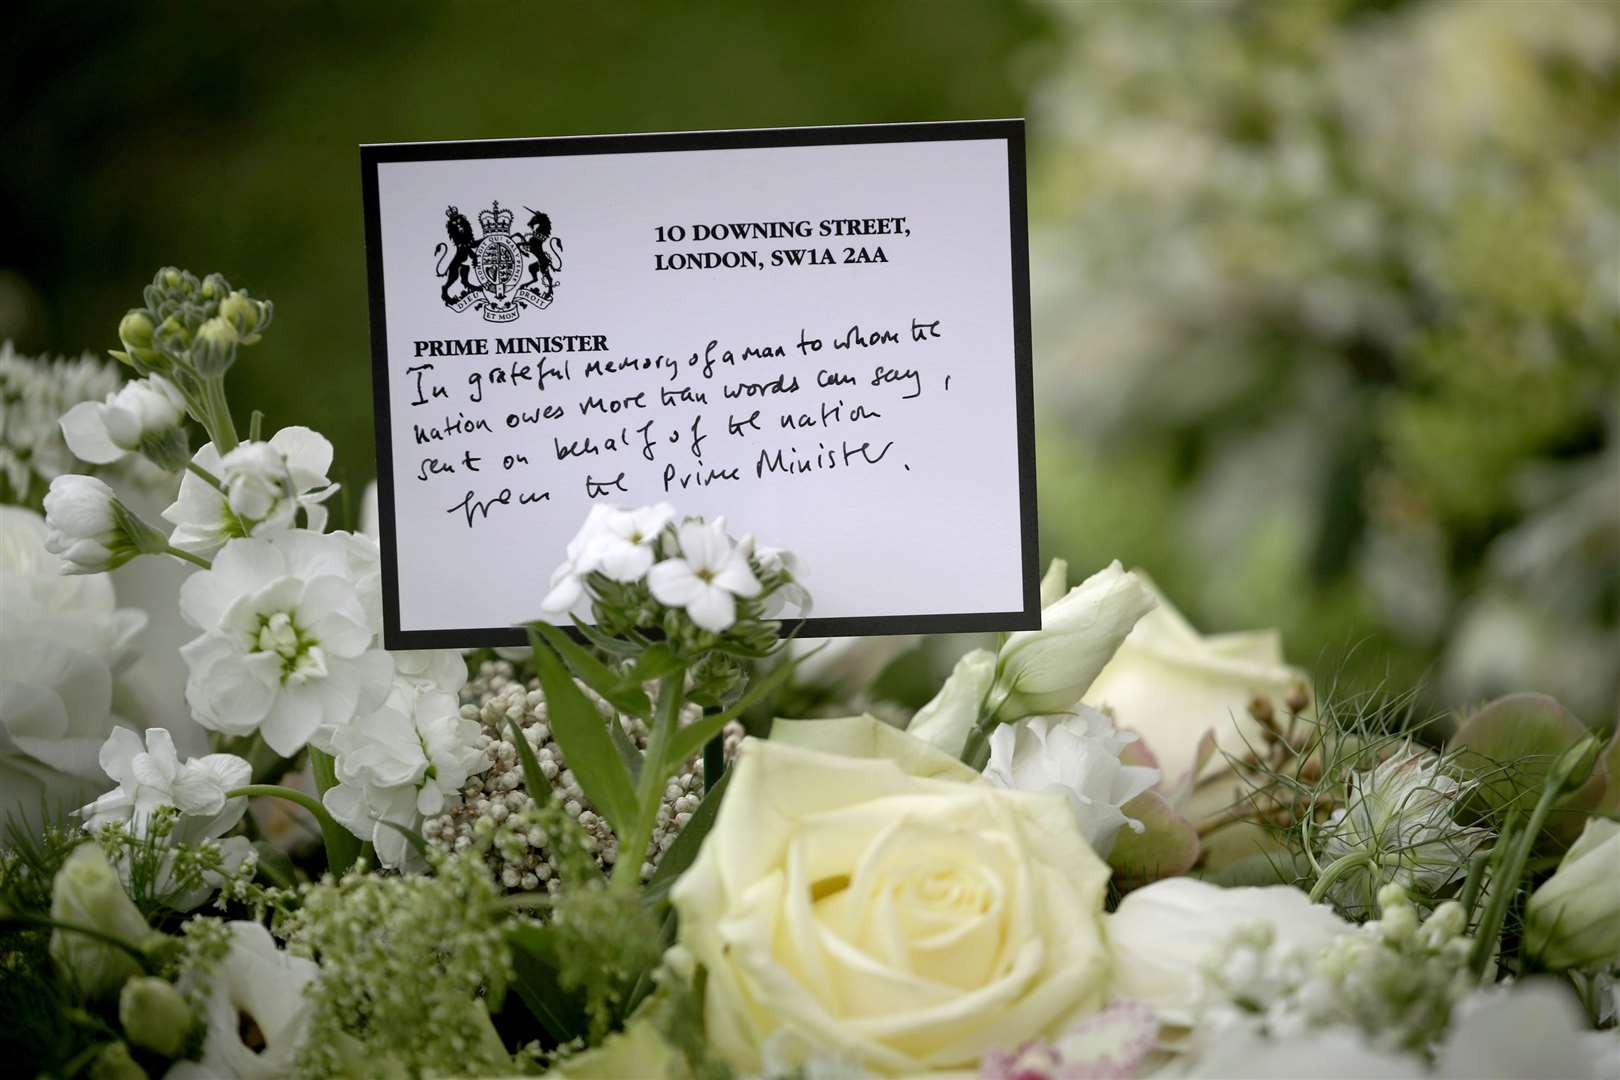 A wreath sent by Prime Minister Boris Johnson among the flowers outside St George’s Chapel at Windsor Castle, Berkshire (Steve Parsons/PA)